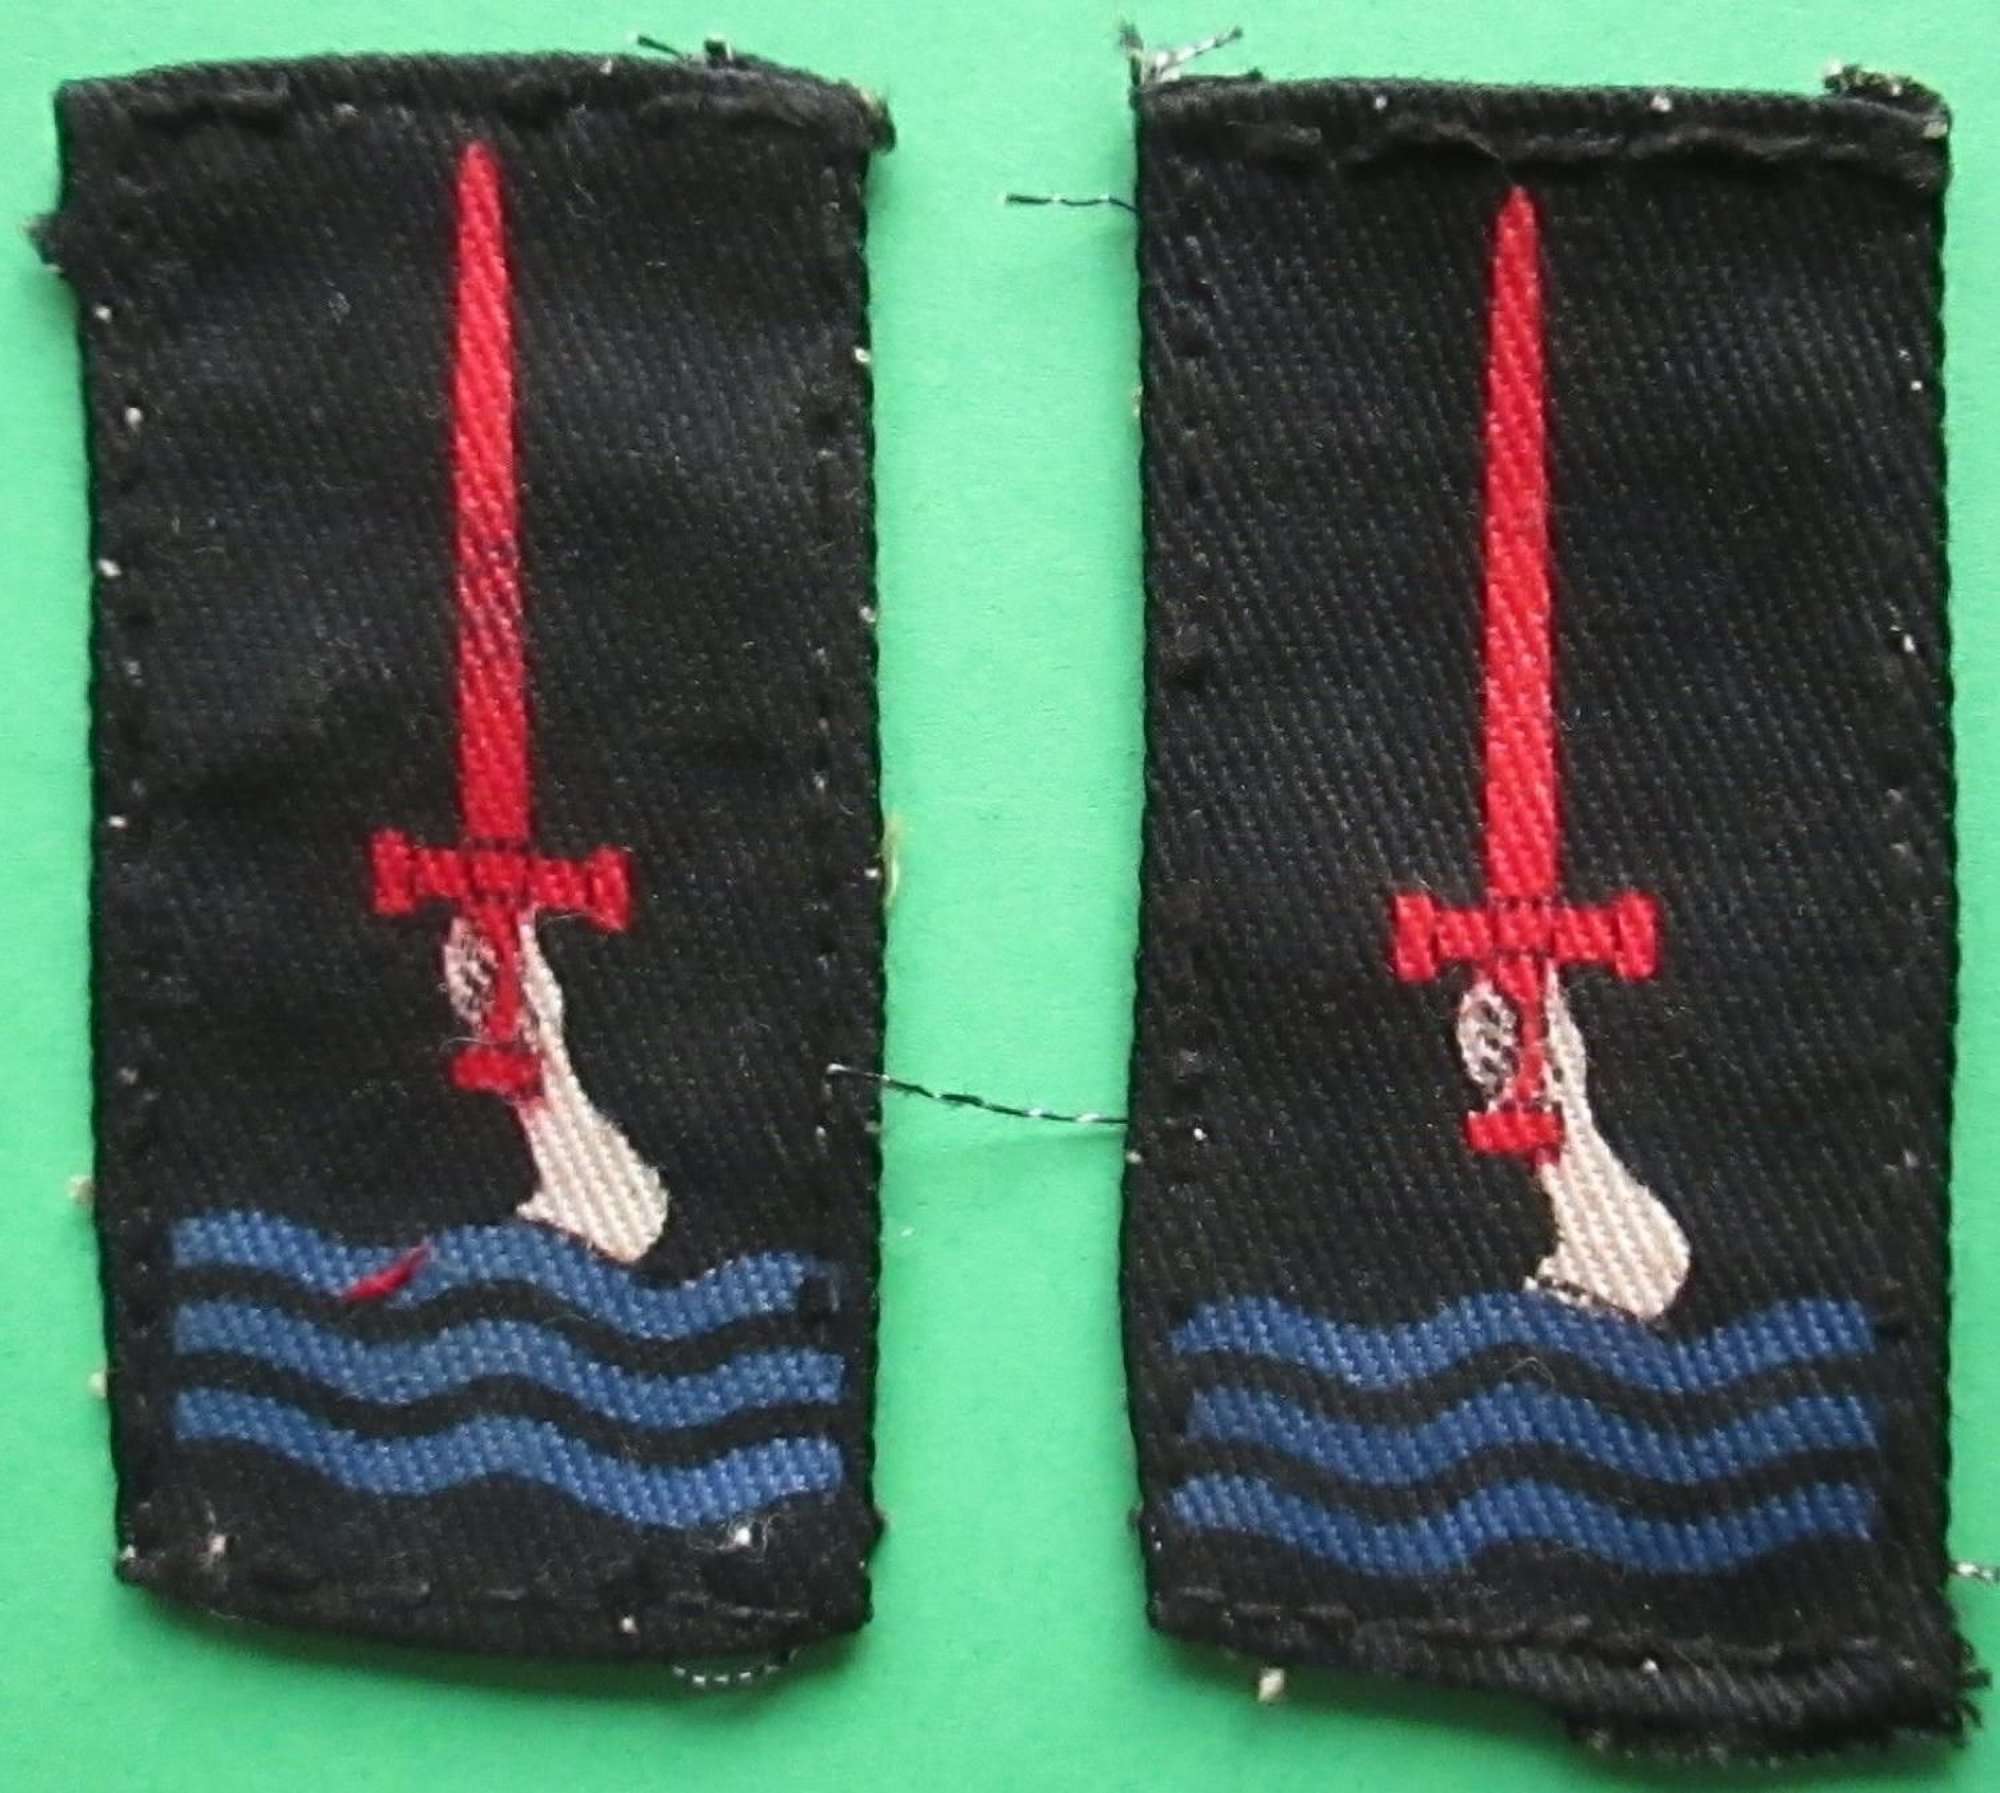 A PAIR OF 77TH DIVISION FORMATION PATCHES